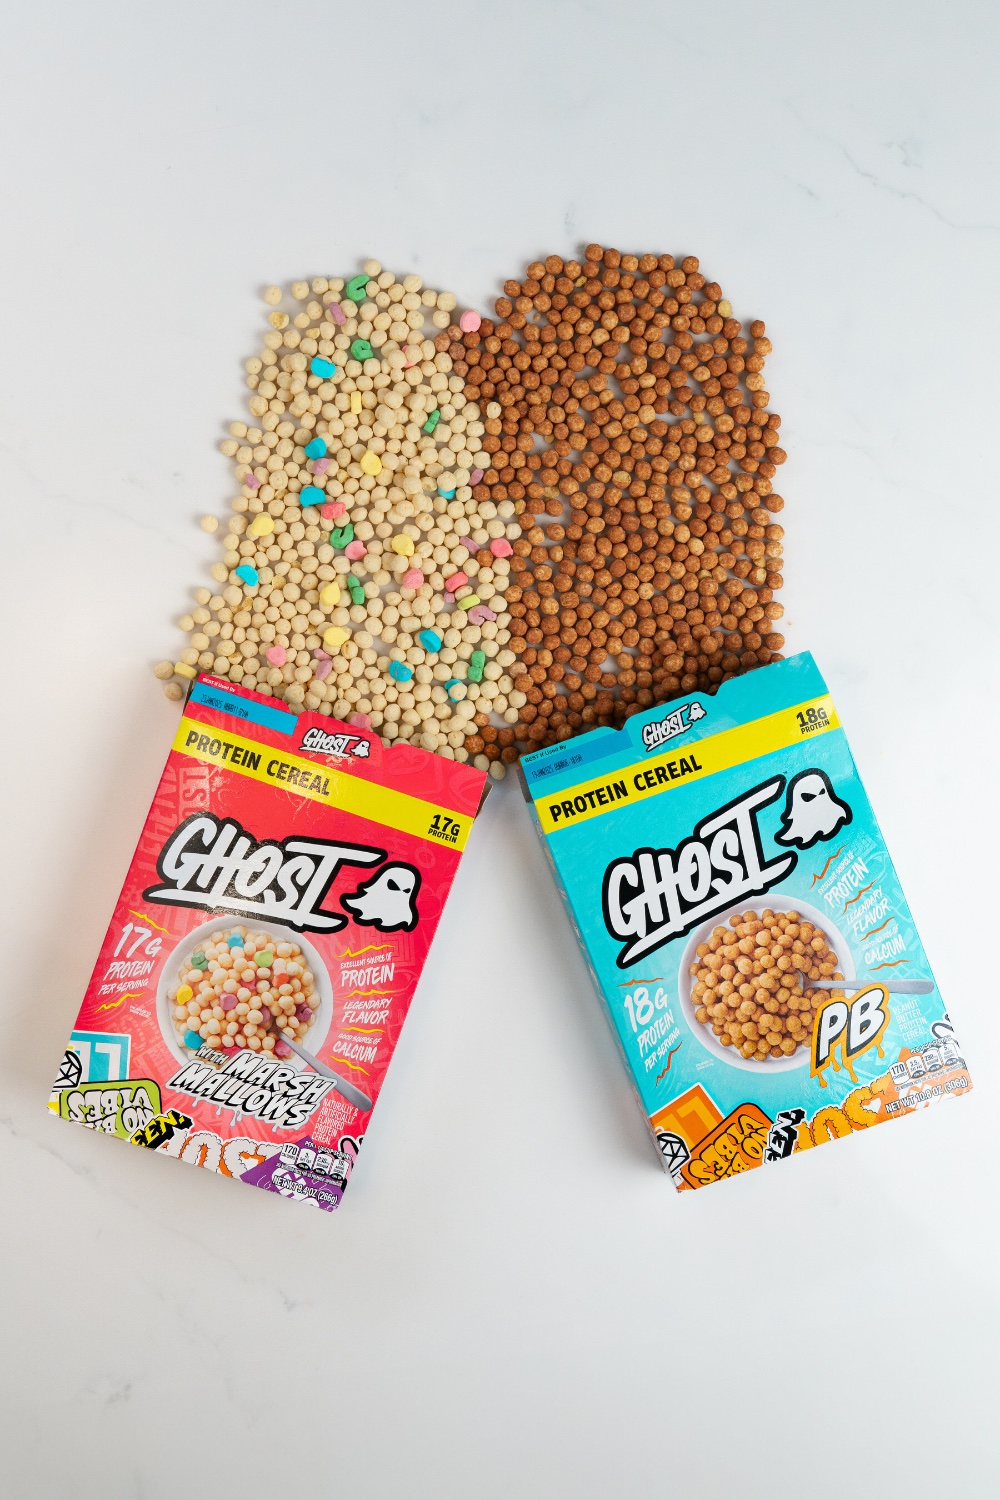 Ghost and General Mills Announce New Protein-Packed Breakfast Cereal